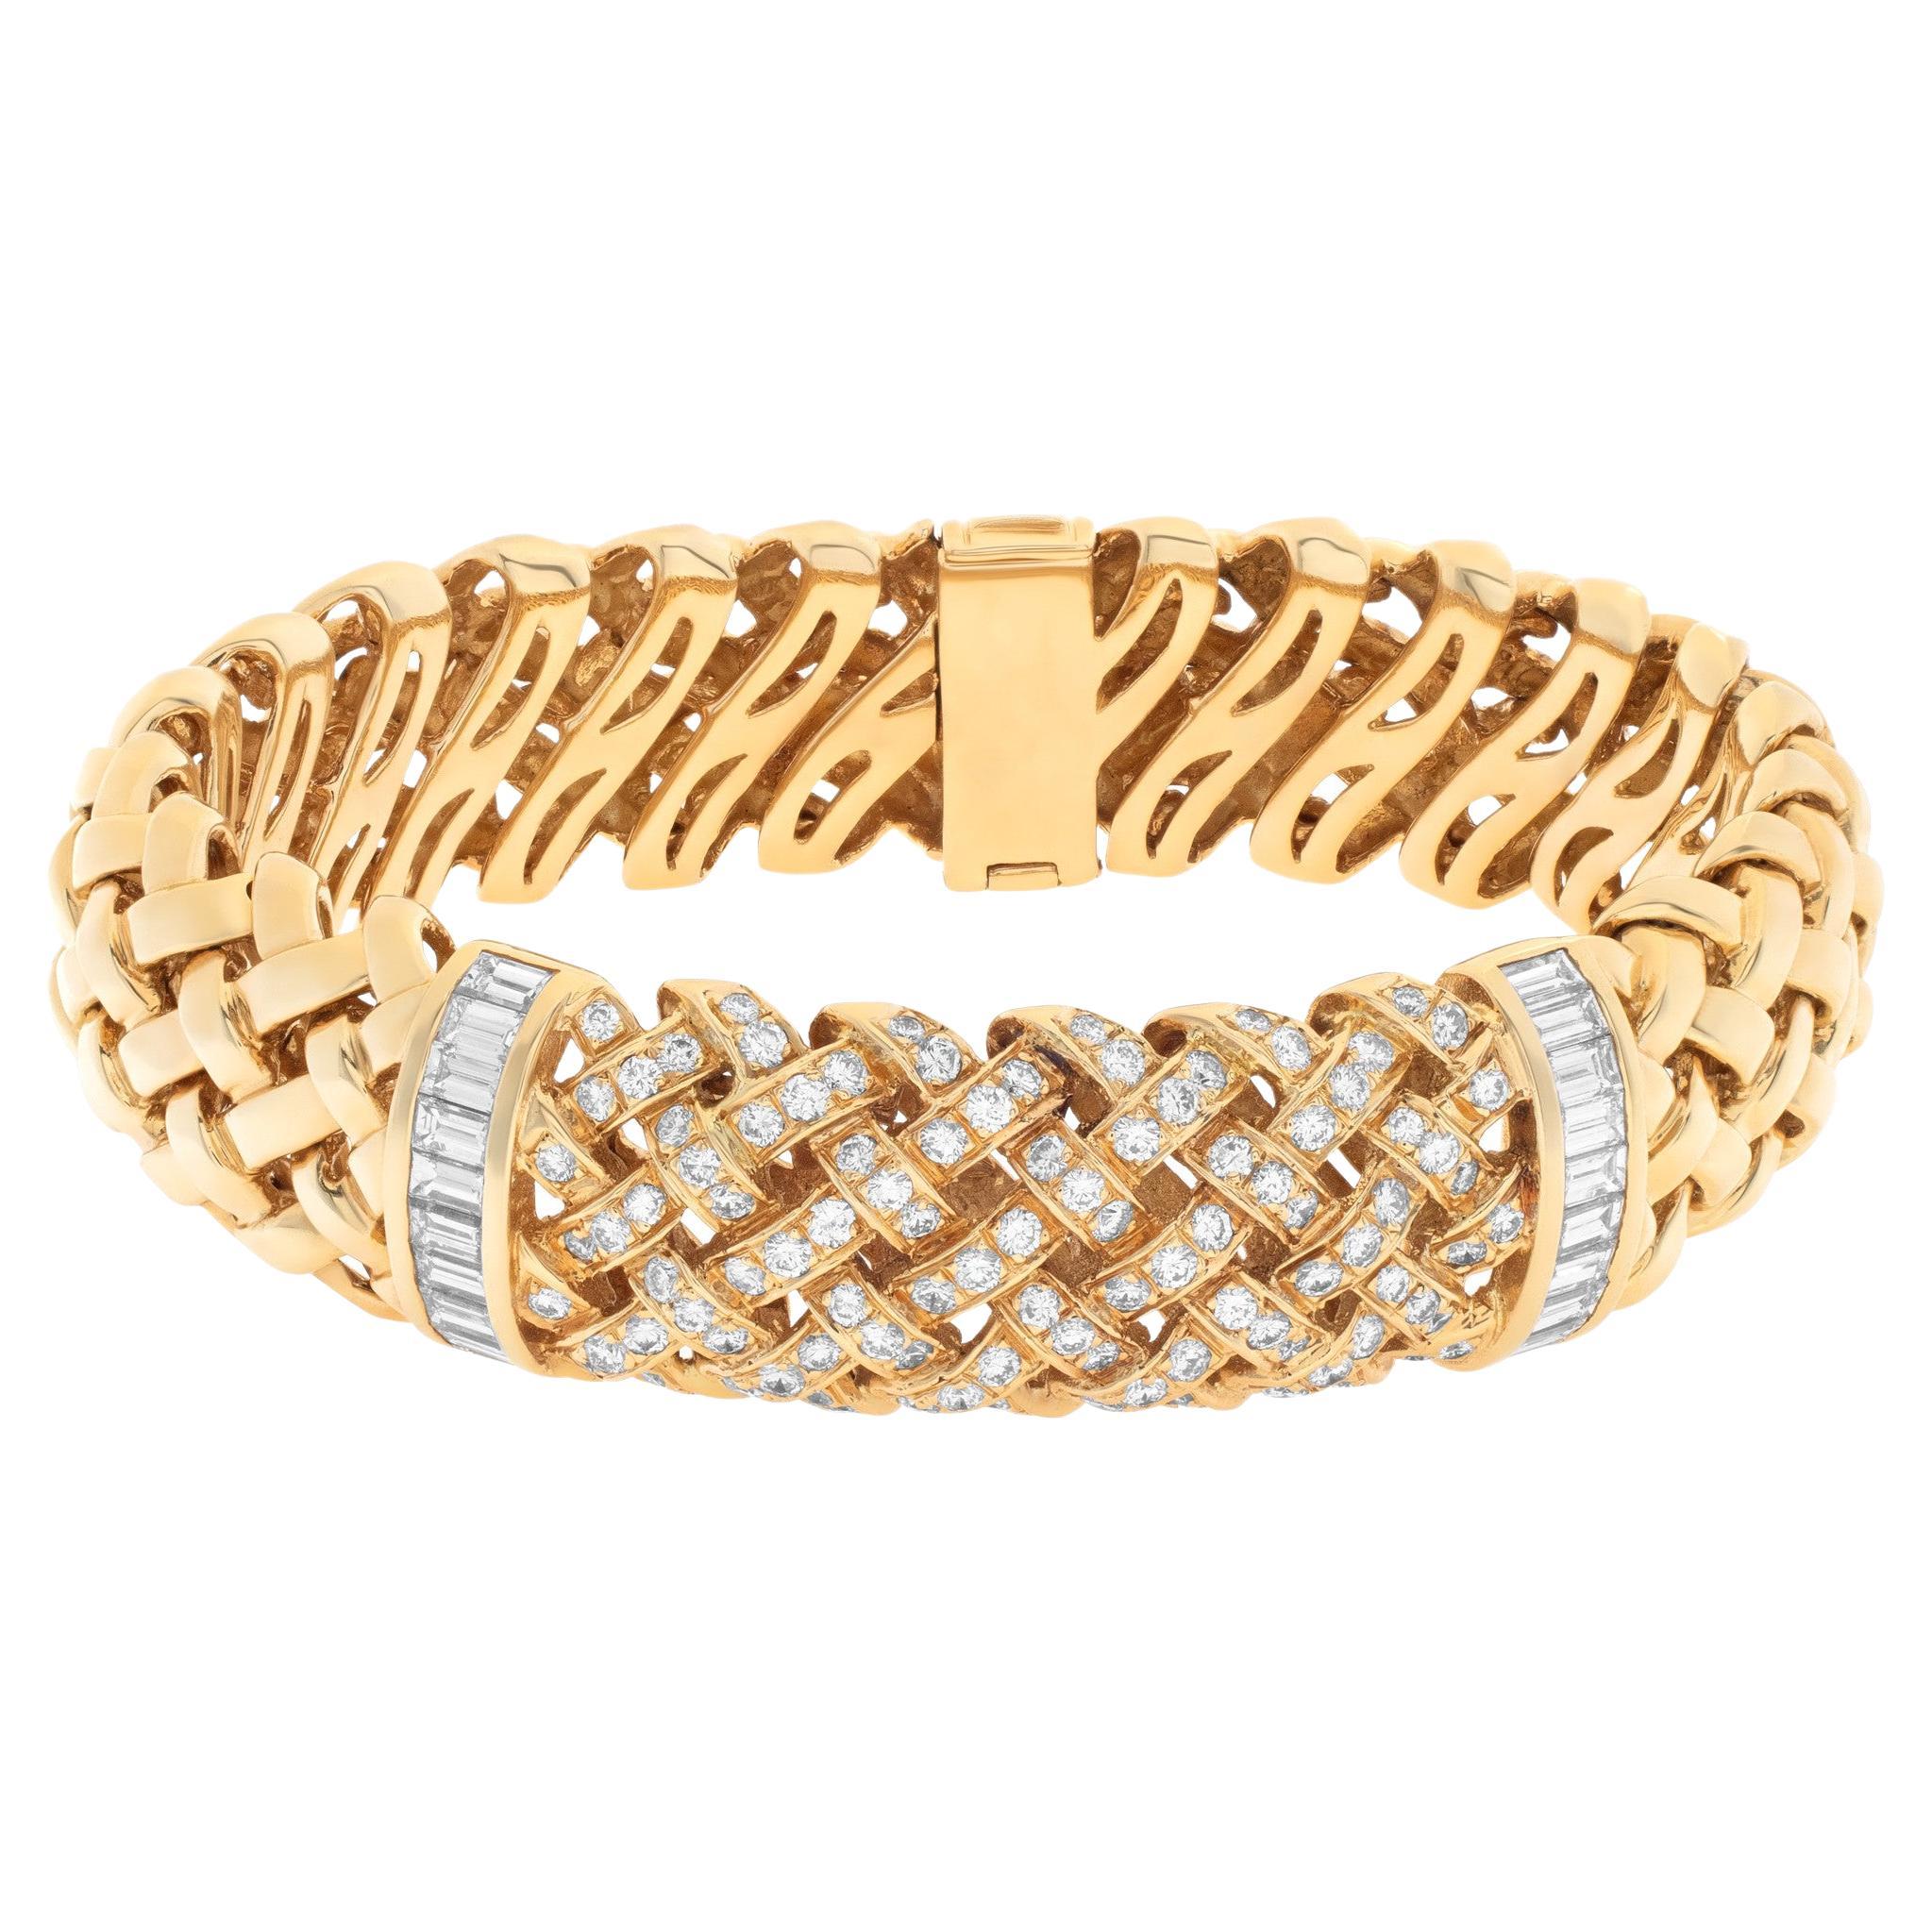 Tiffany & Co. Vannerie Collection Bracelet in 18K Yellow Gold and Diamonds